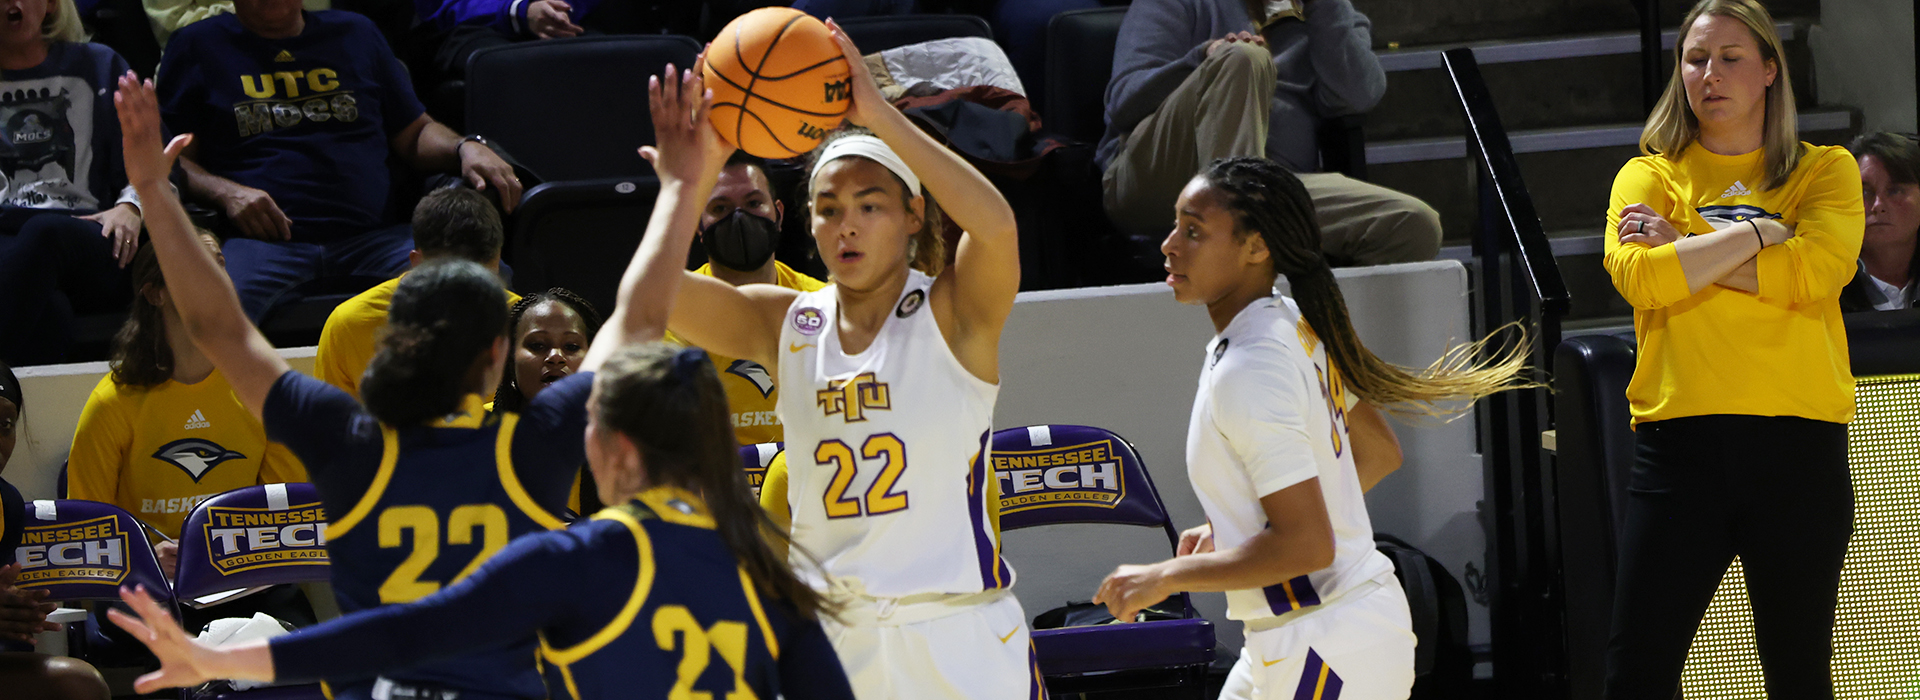 TTU women's basketball at Vandy to be televised on SEC Network, COVID guidelines in place at Memorial Gym